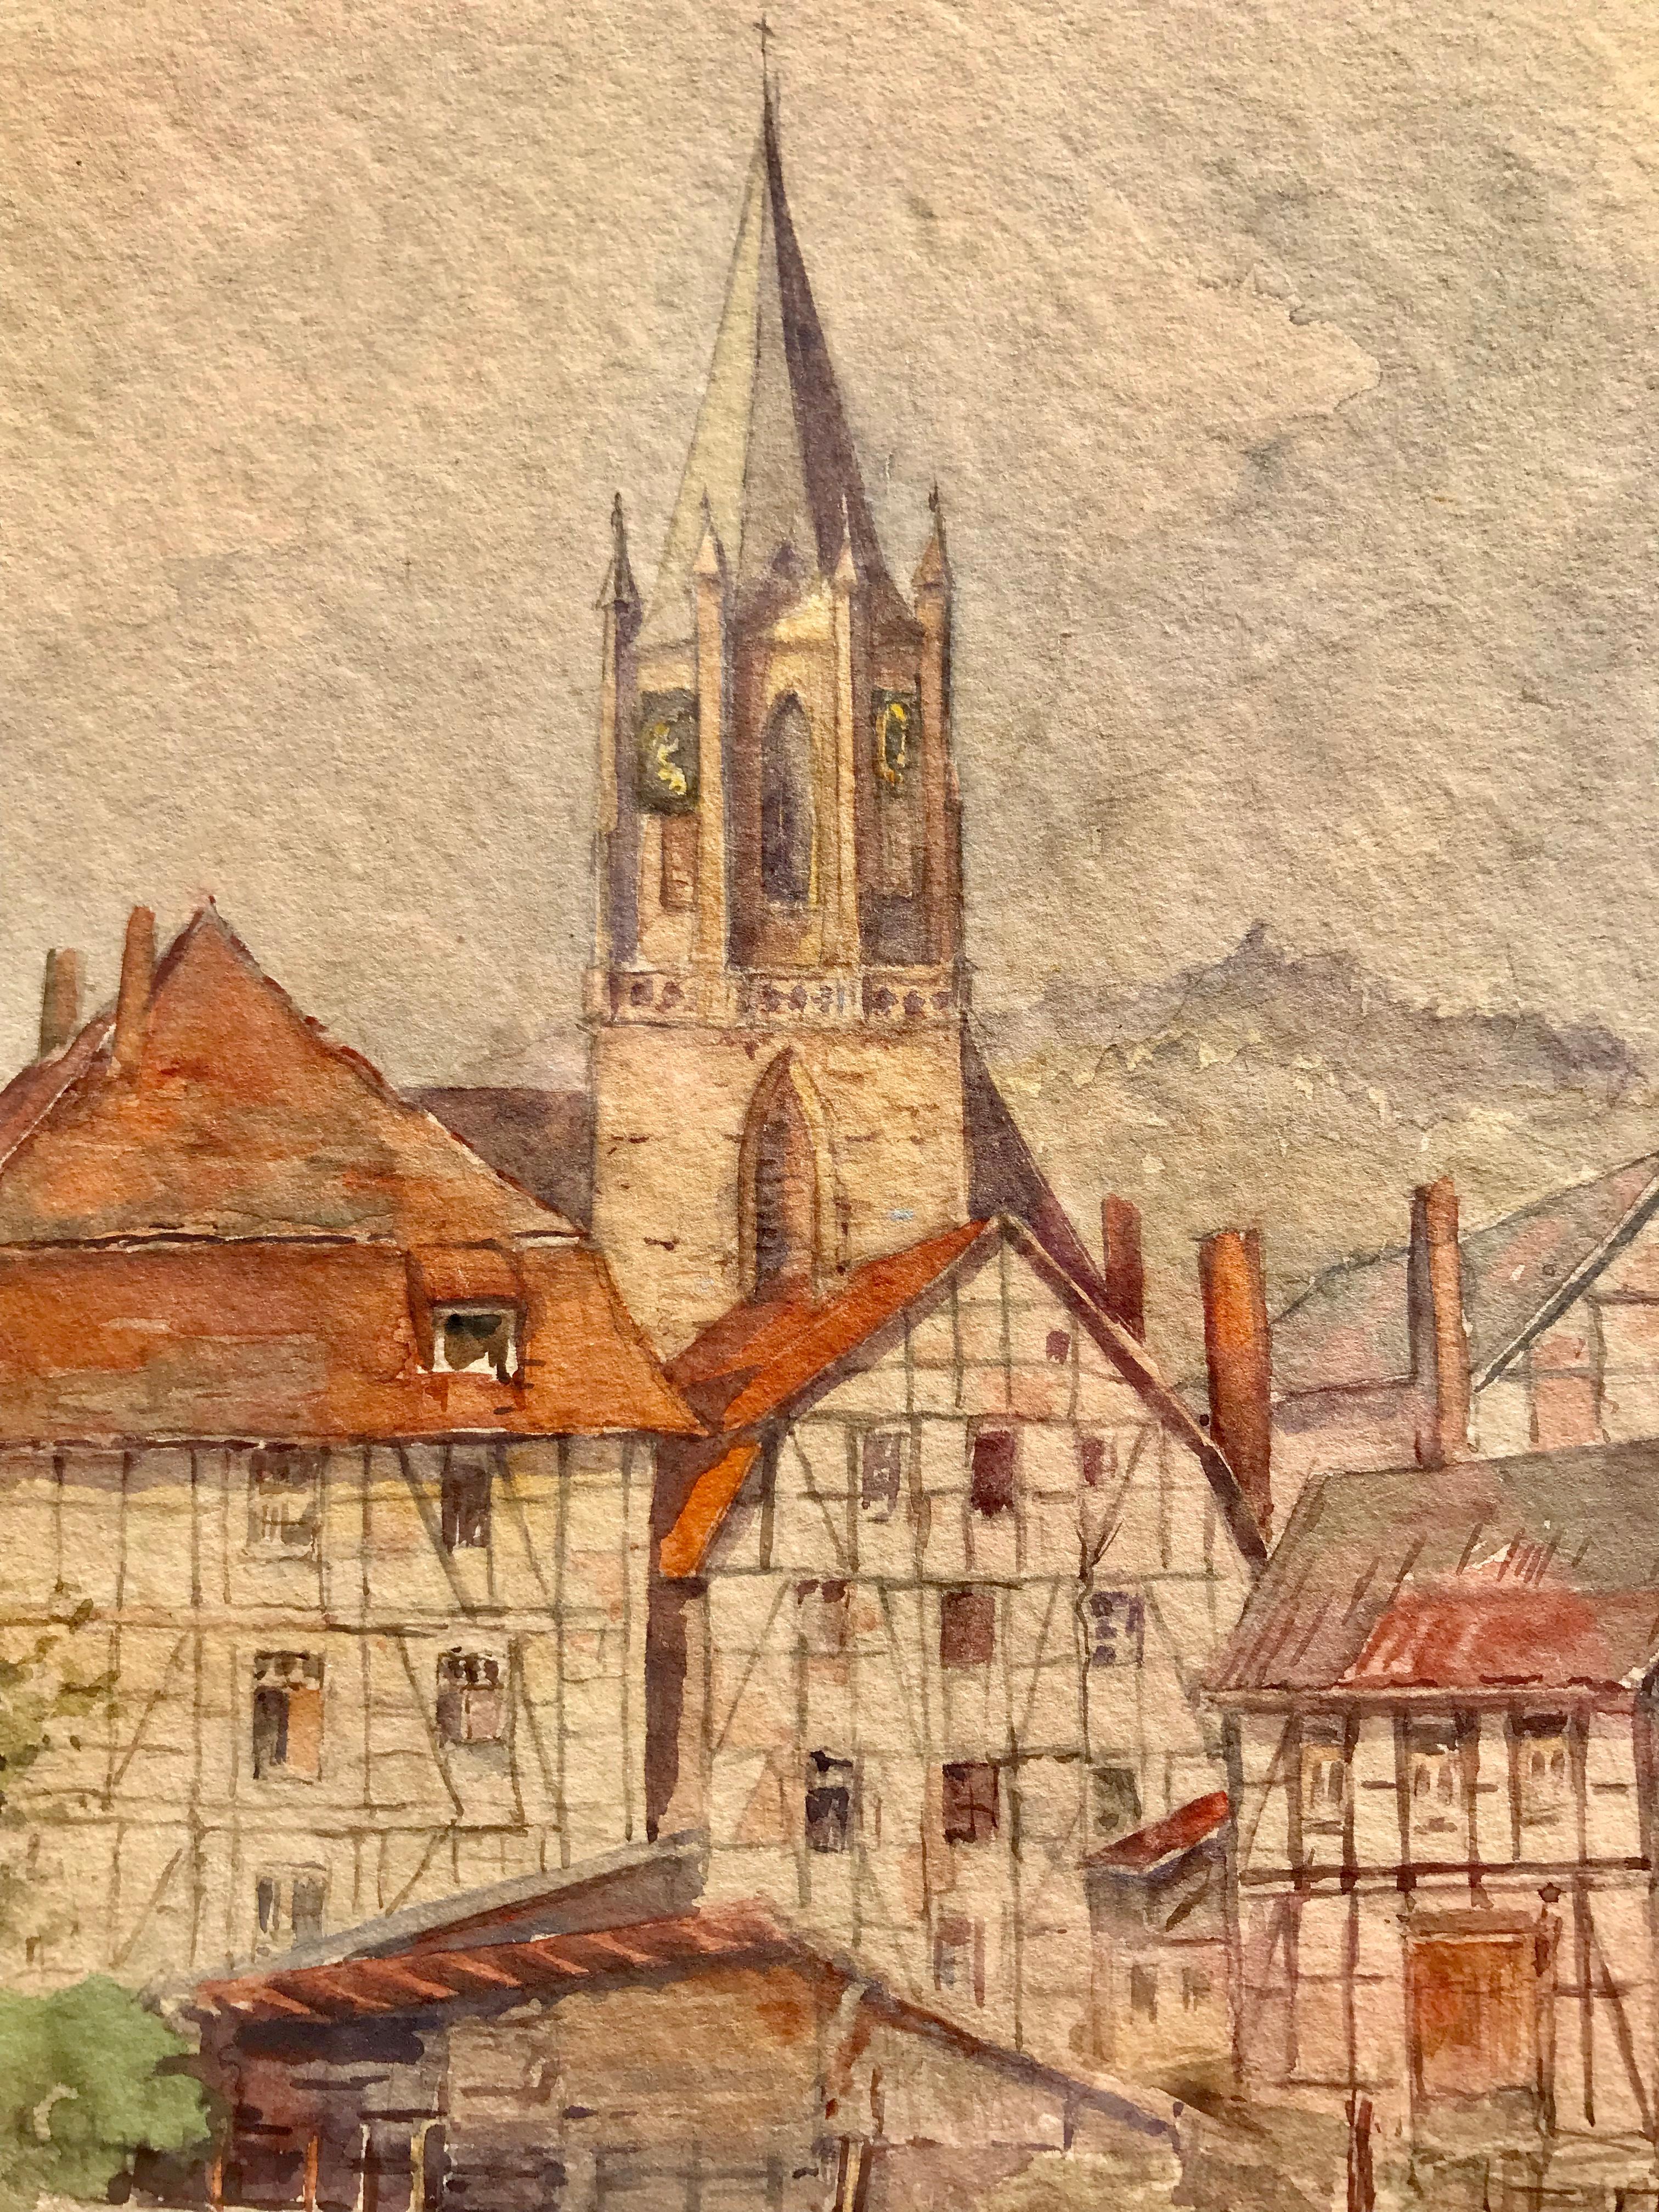 Watercolor, gouache on paper of Rotenburg/Fulda area in Germany.  The river in the artwork would be the Fulda River.  Signed and dated, 1945 lower left with the location stated. In very good original condition.  Newly framed in contemporary